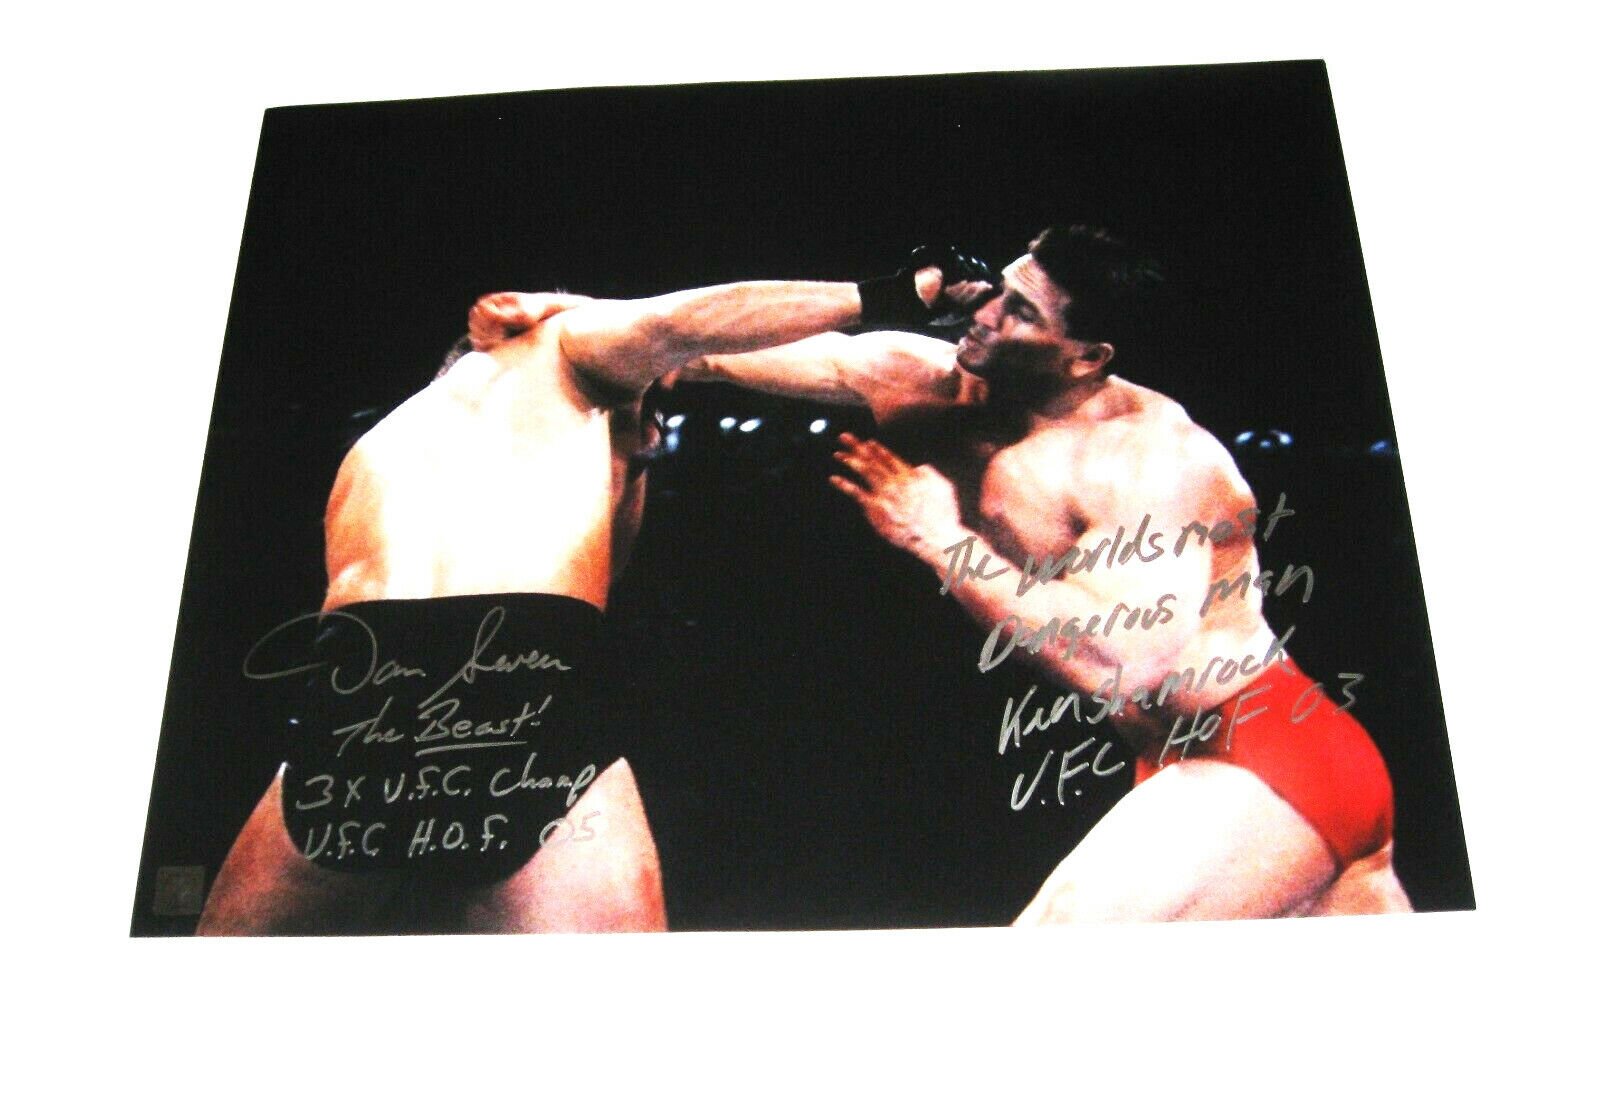 DAN SEVERN AND KEN SHAMROCK HAND SIGNED AUTOGRAPHED 16X20 Photo Poster painting WITH PROOF & COA